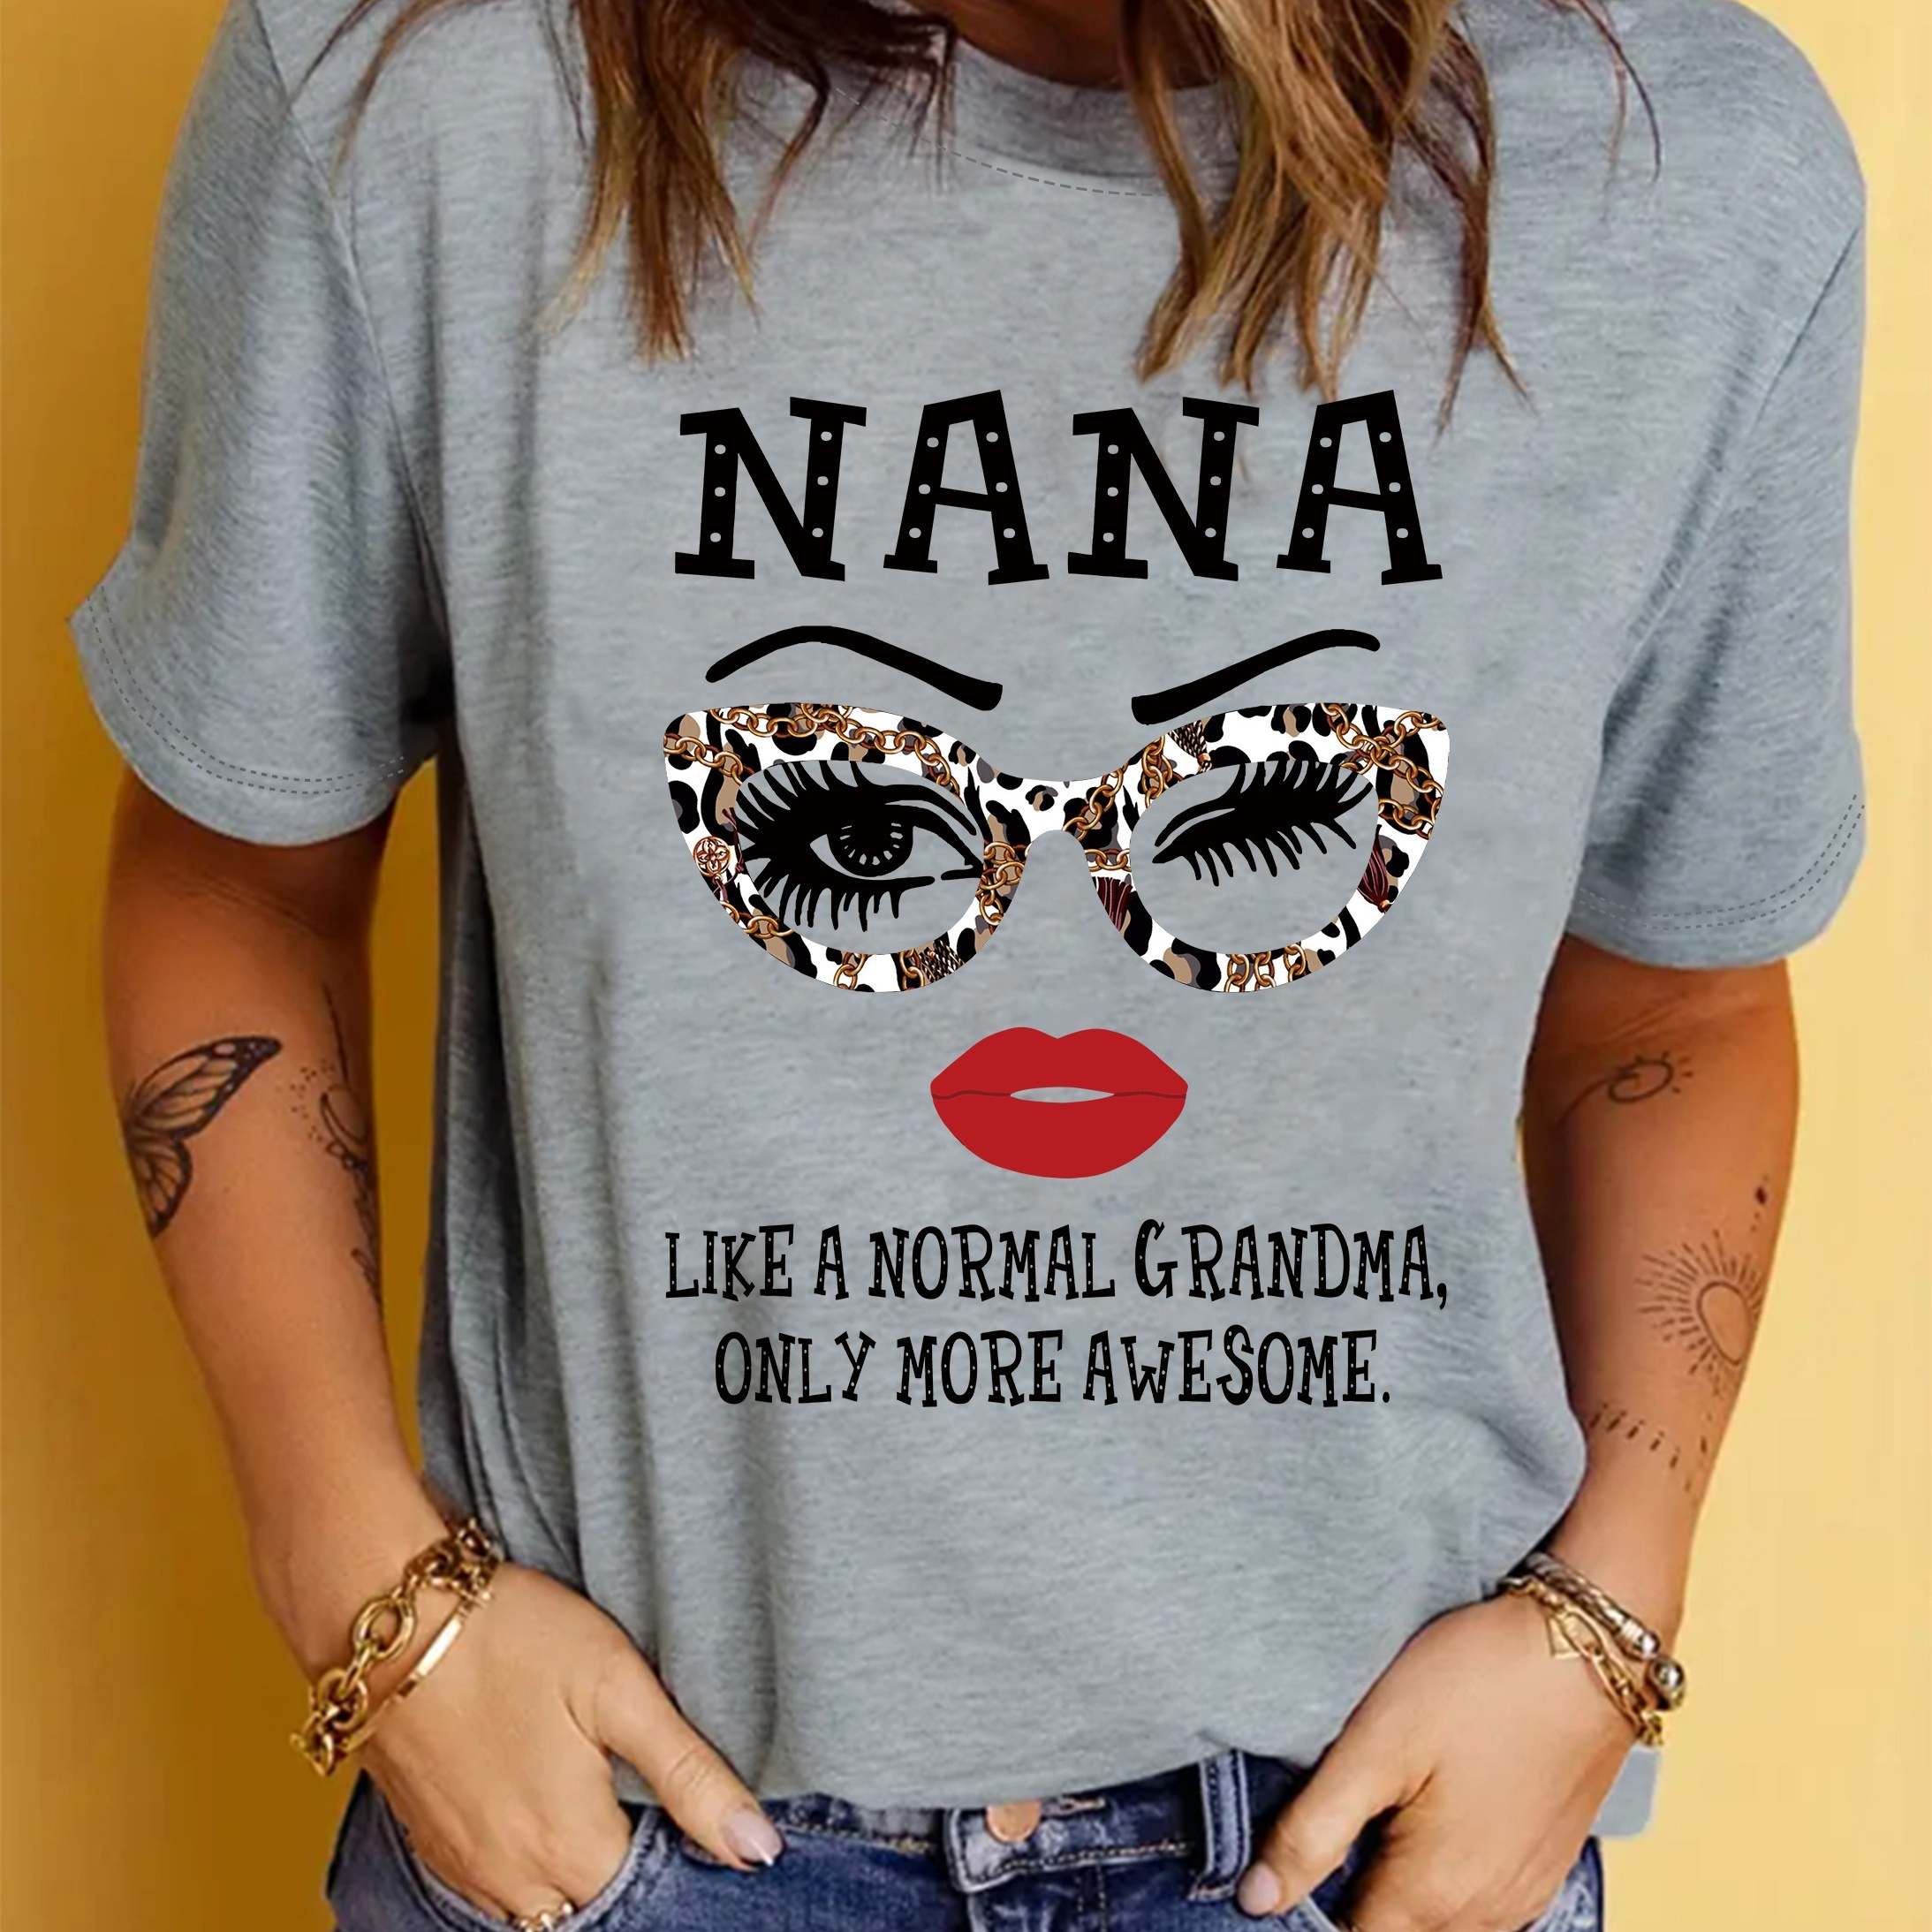 

Nana Letter Print T-shirt, Short Sleeve Crew Neck Casual Top For Summer & Spring, Women's Clothing